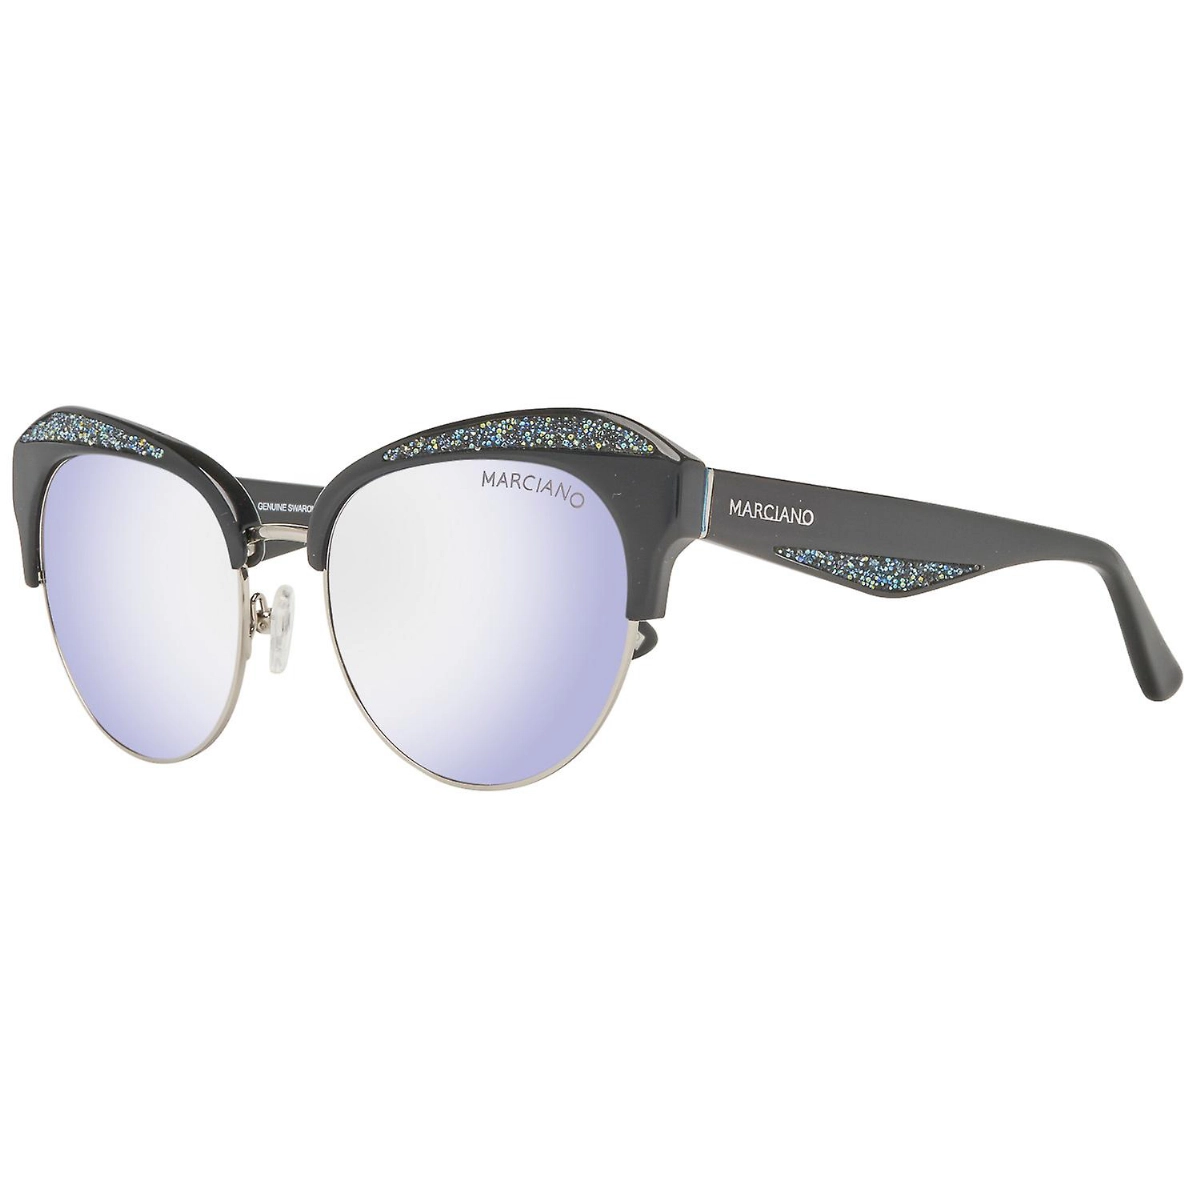 LUNETTES FEMMES GUESS MARCIANO GM0777-5501C